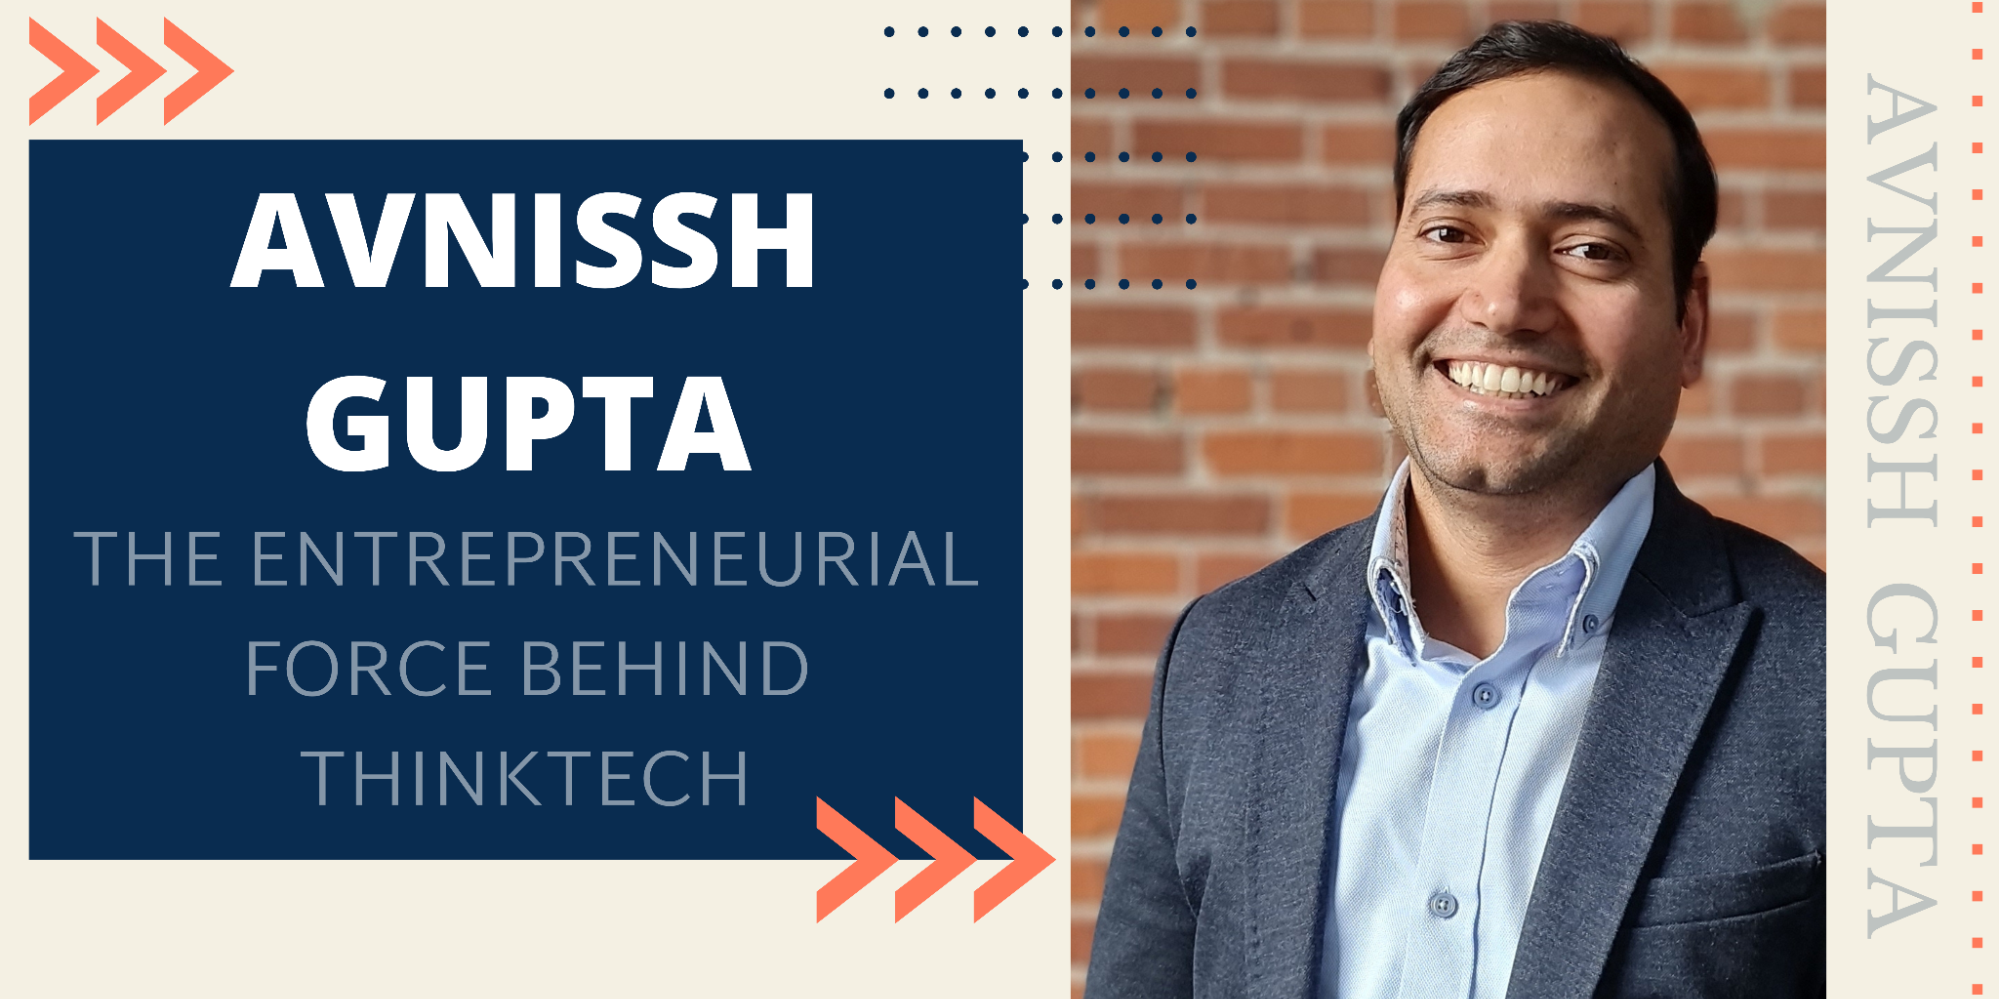 Avnissh Gupta The Driving Force Behind Thinktech And A Pioneer In The World Of Digital 